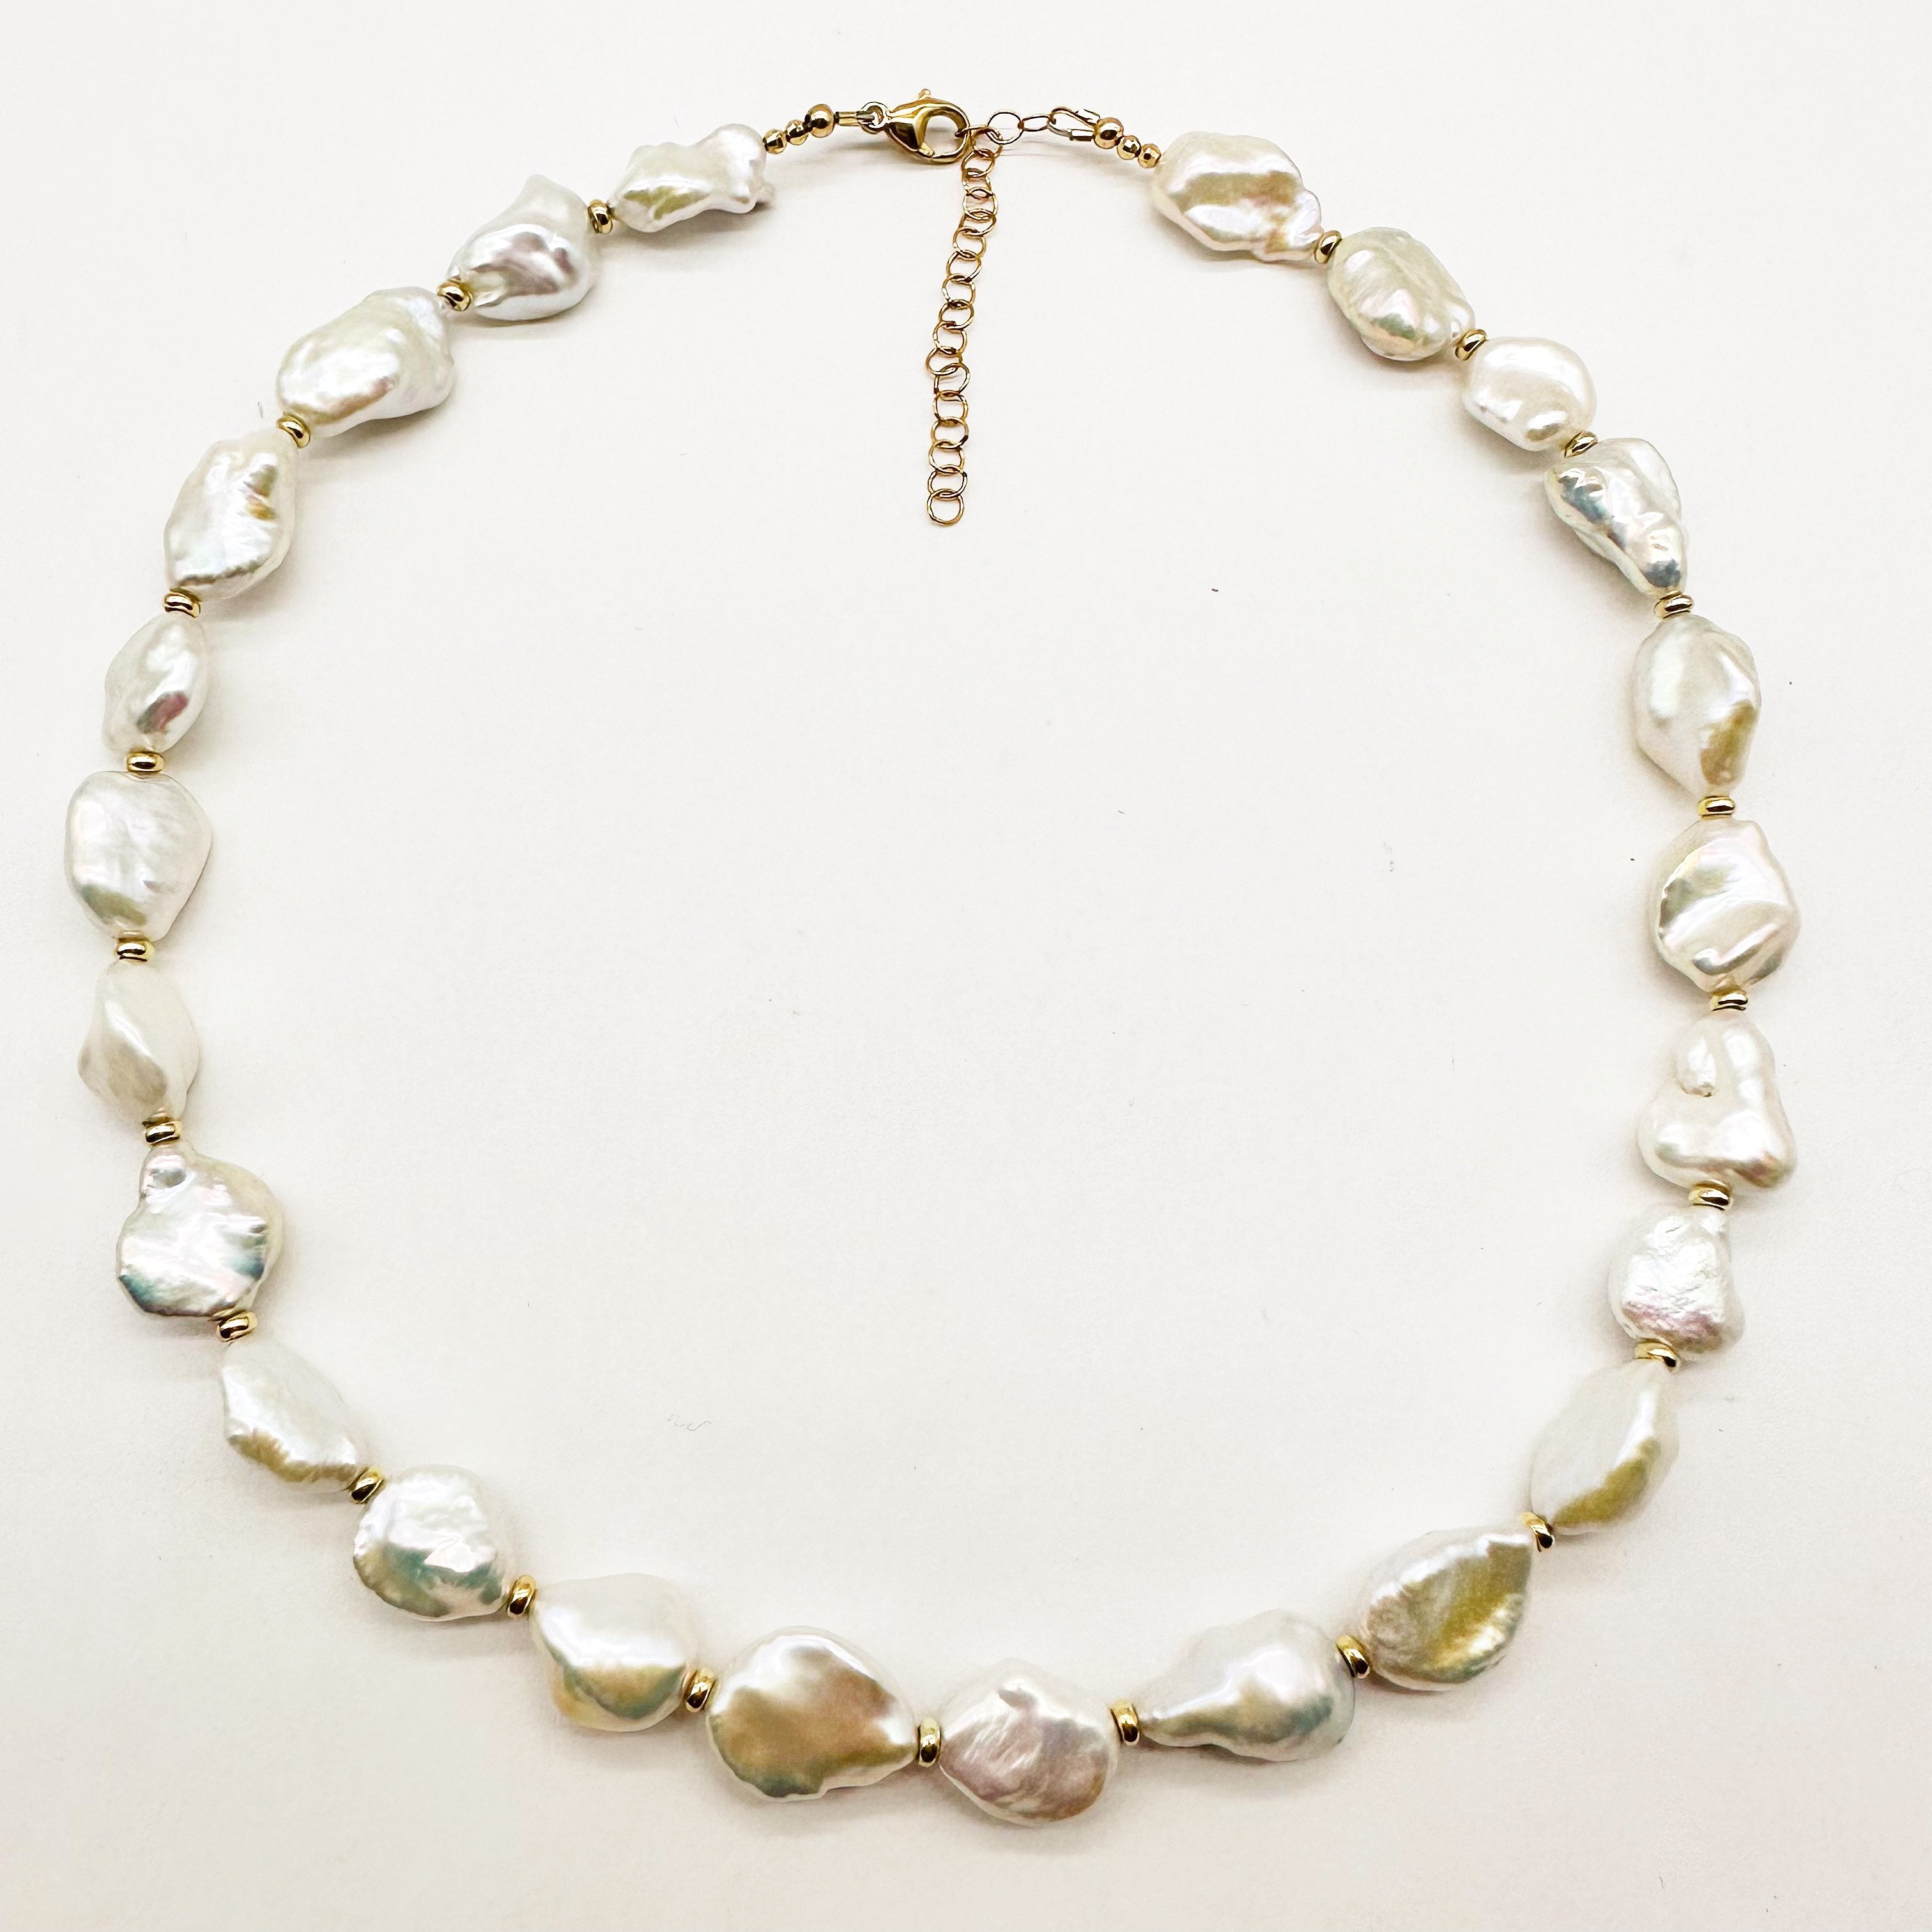 WHITE KEISHI PEARLS WITH 14K GOLD